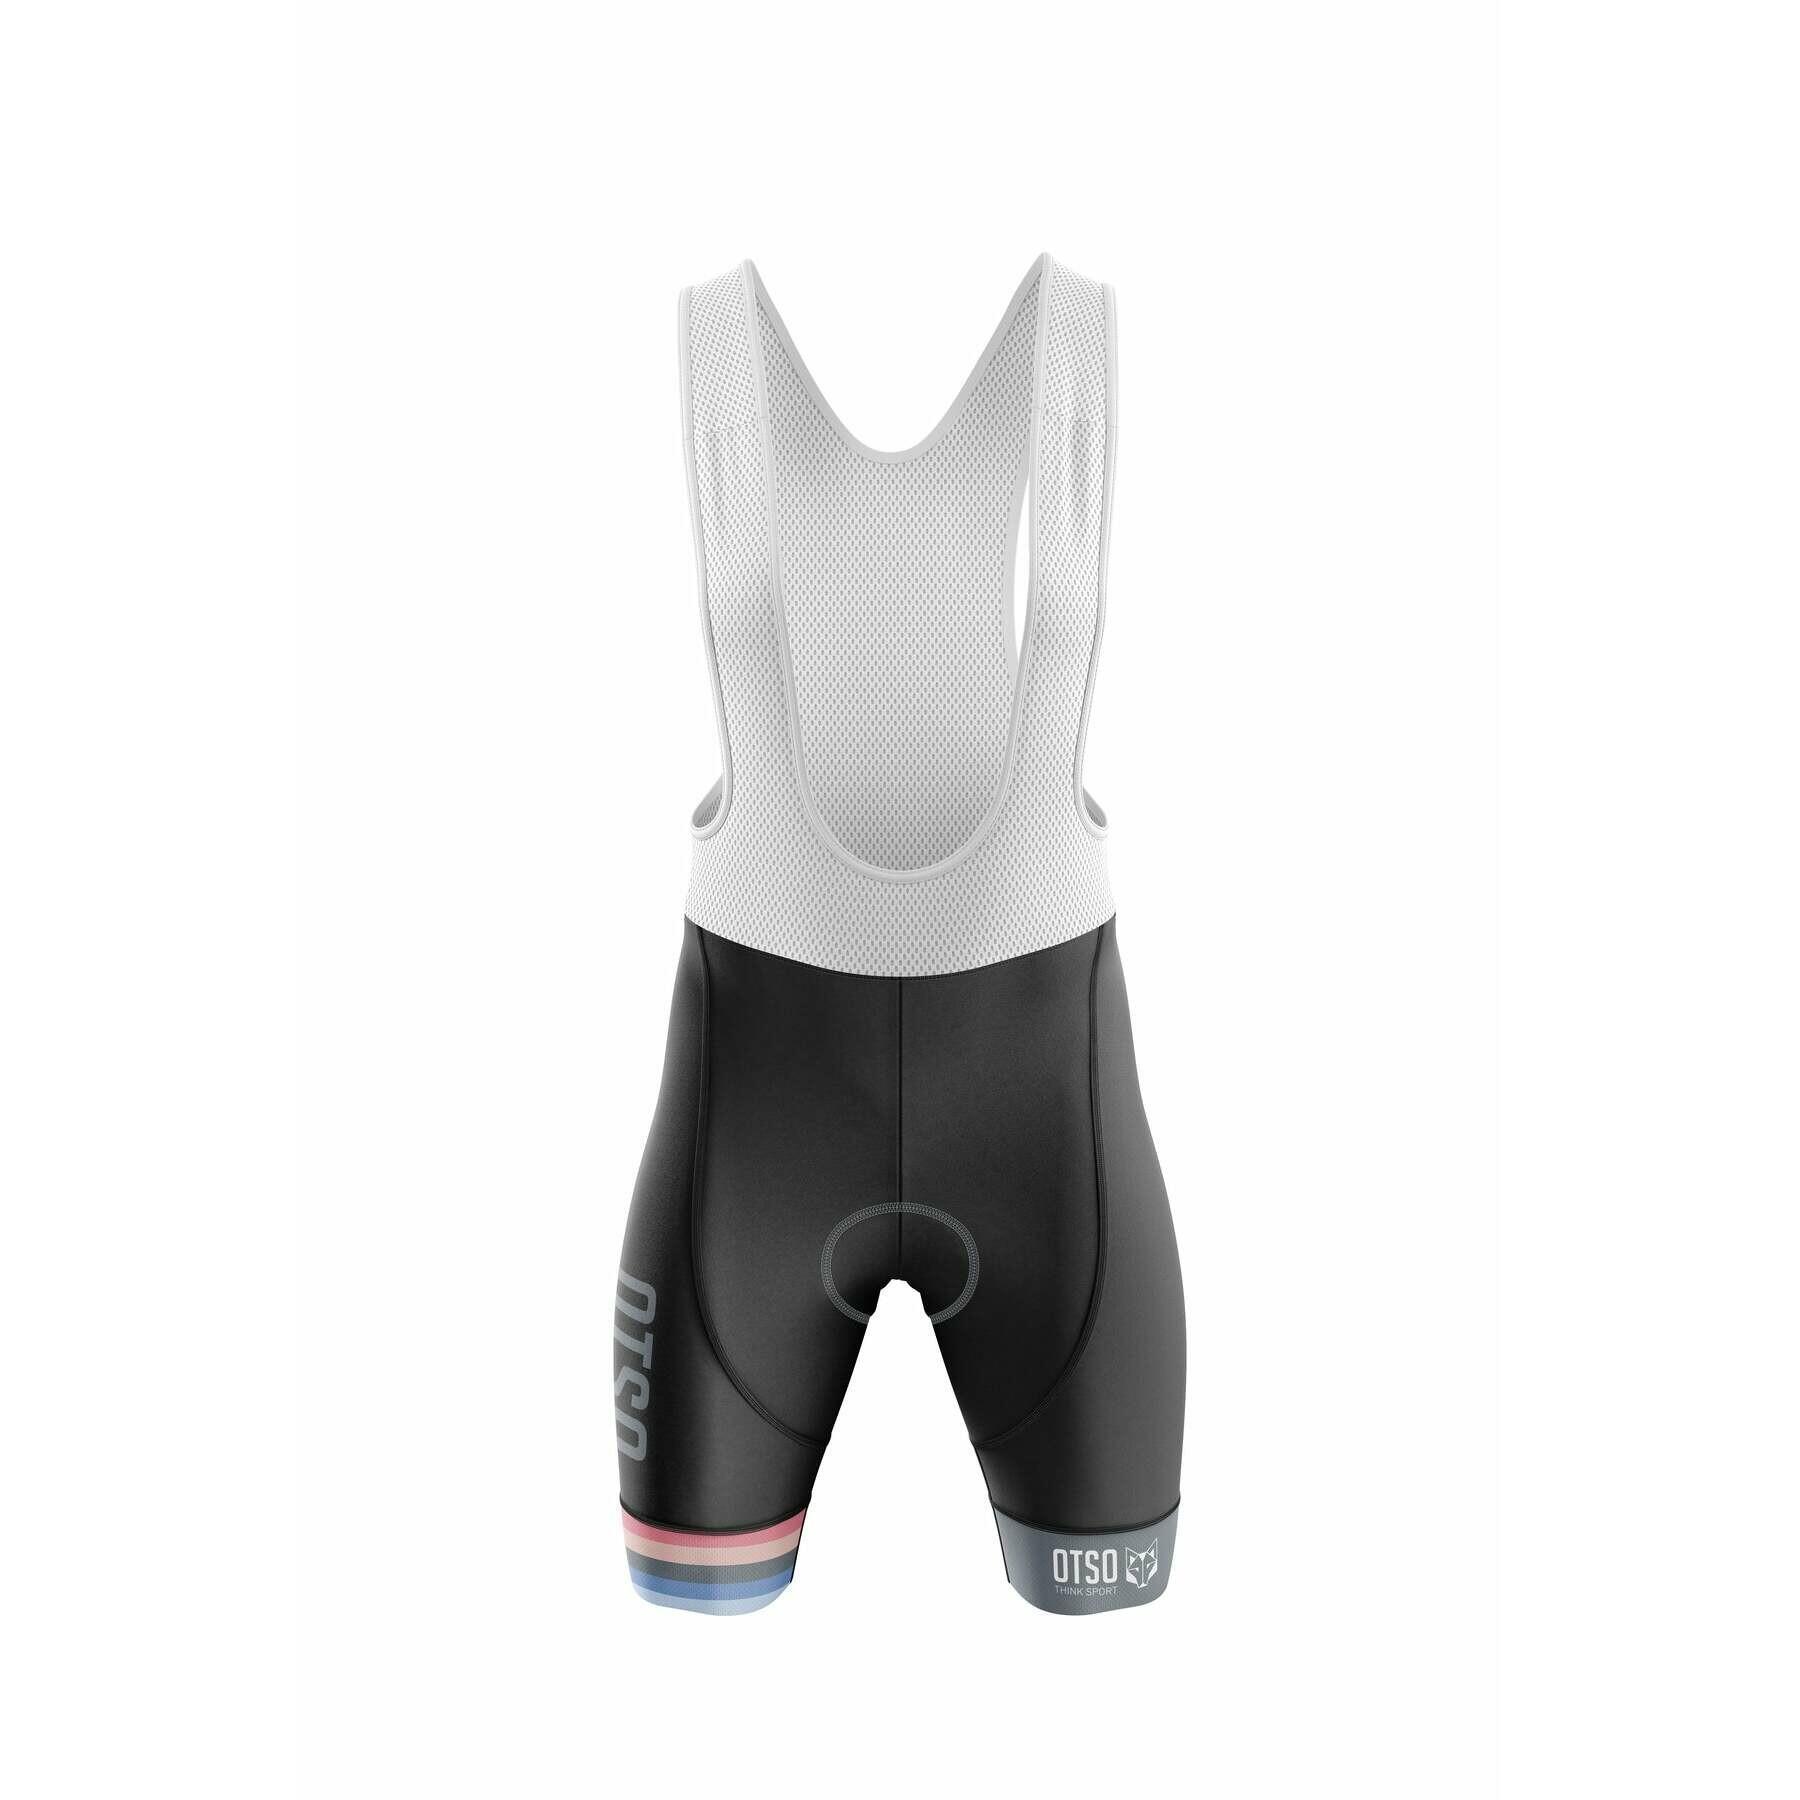 Cycling shorts with straps for women Otso